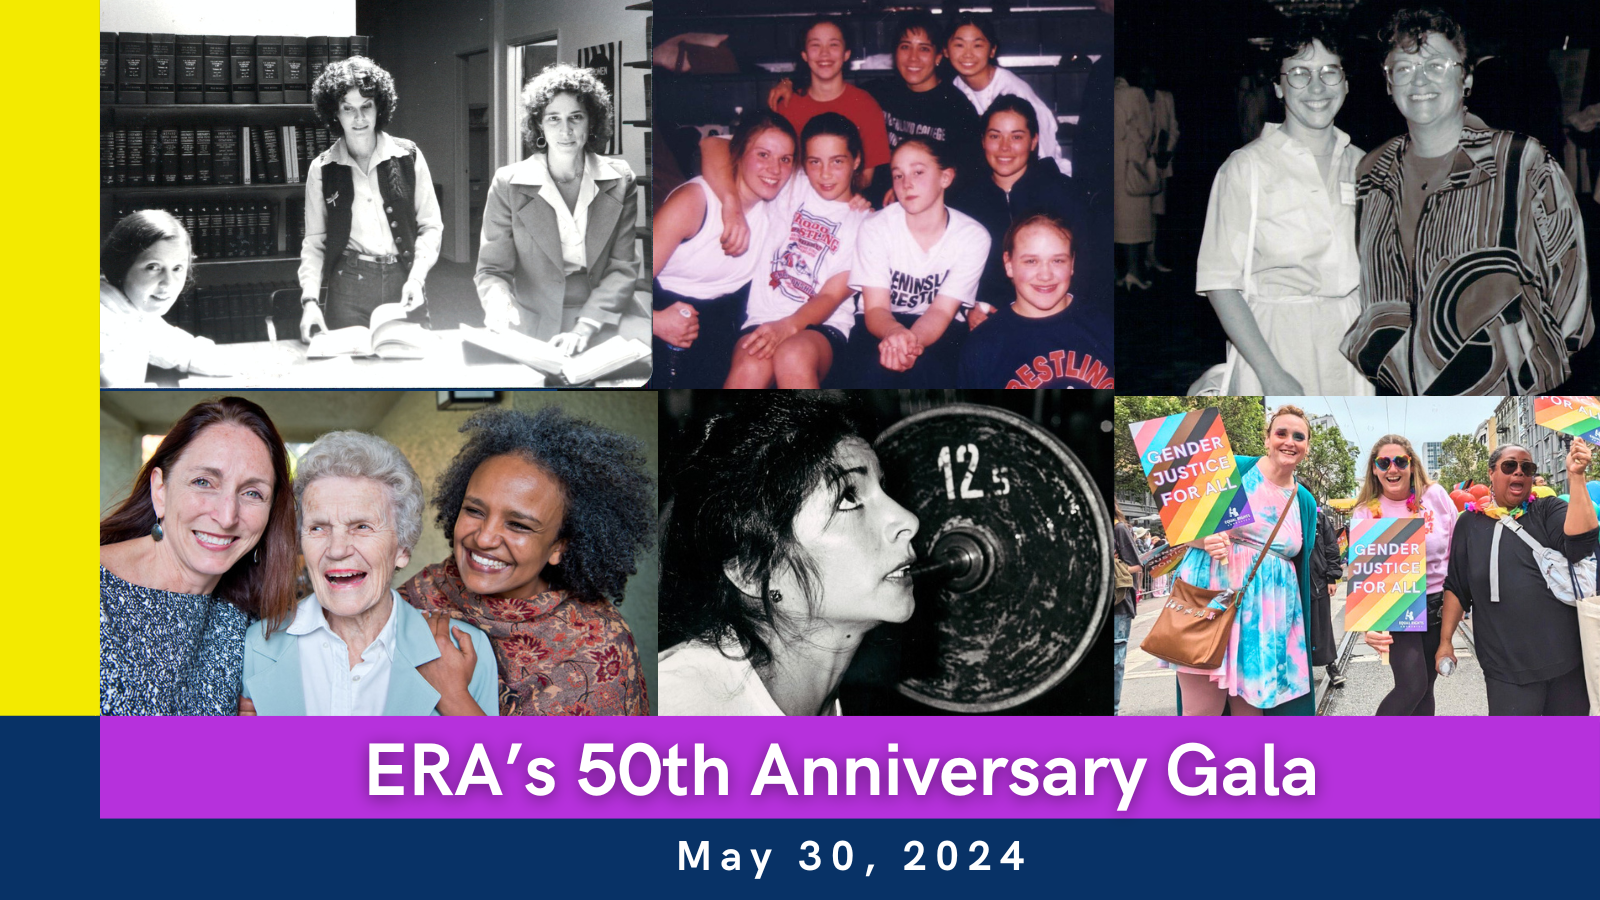 ERA's 50th Anniversary Gala: May 30, 2024. [A photo collage of ERA clients, staff, and supporters over the decades. In the upper left: a black and white photo of ERA co-founders and staff in the 1970s. Next to it: a color photo with vintage finish, group of 8 high school girl wrestlers, ERA clients; Top right: a black and white photo of ERA supporters at a 1980s Gala; Bottom left: a color photo of ERA Executive Director Noreen Farrell embracing ERA longtime supporter Madeline Mixer, and another ERA supporter, embracing and laughing together; Bottom middle photo is a black and white vintage photo of ERA client from the 1970s or 1980s, looking determined and preparing to lift a heavy barbell above her head; Bottom right photo is a group of 3 current ERA staff members at 2023 San Francisco Pride Parade, holding LGBTQ+ Pride rainbow ERA signs, rainbow flags, and laughing together while posing for the camera.